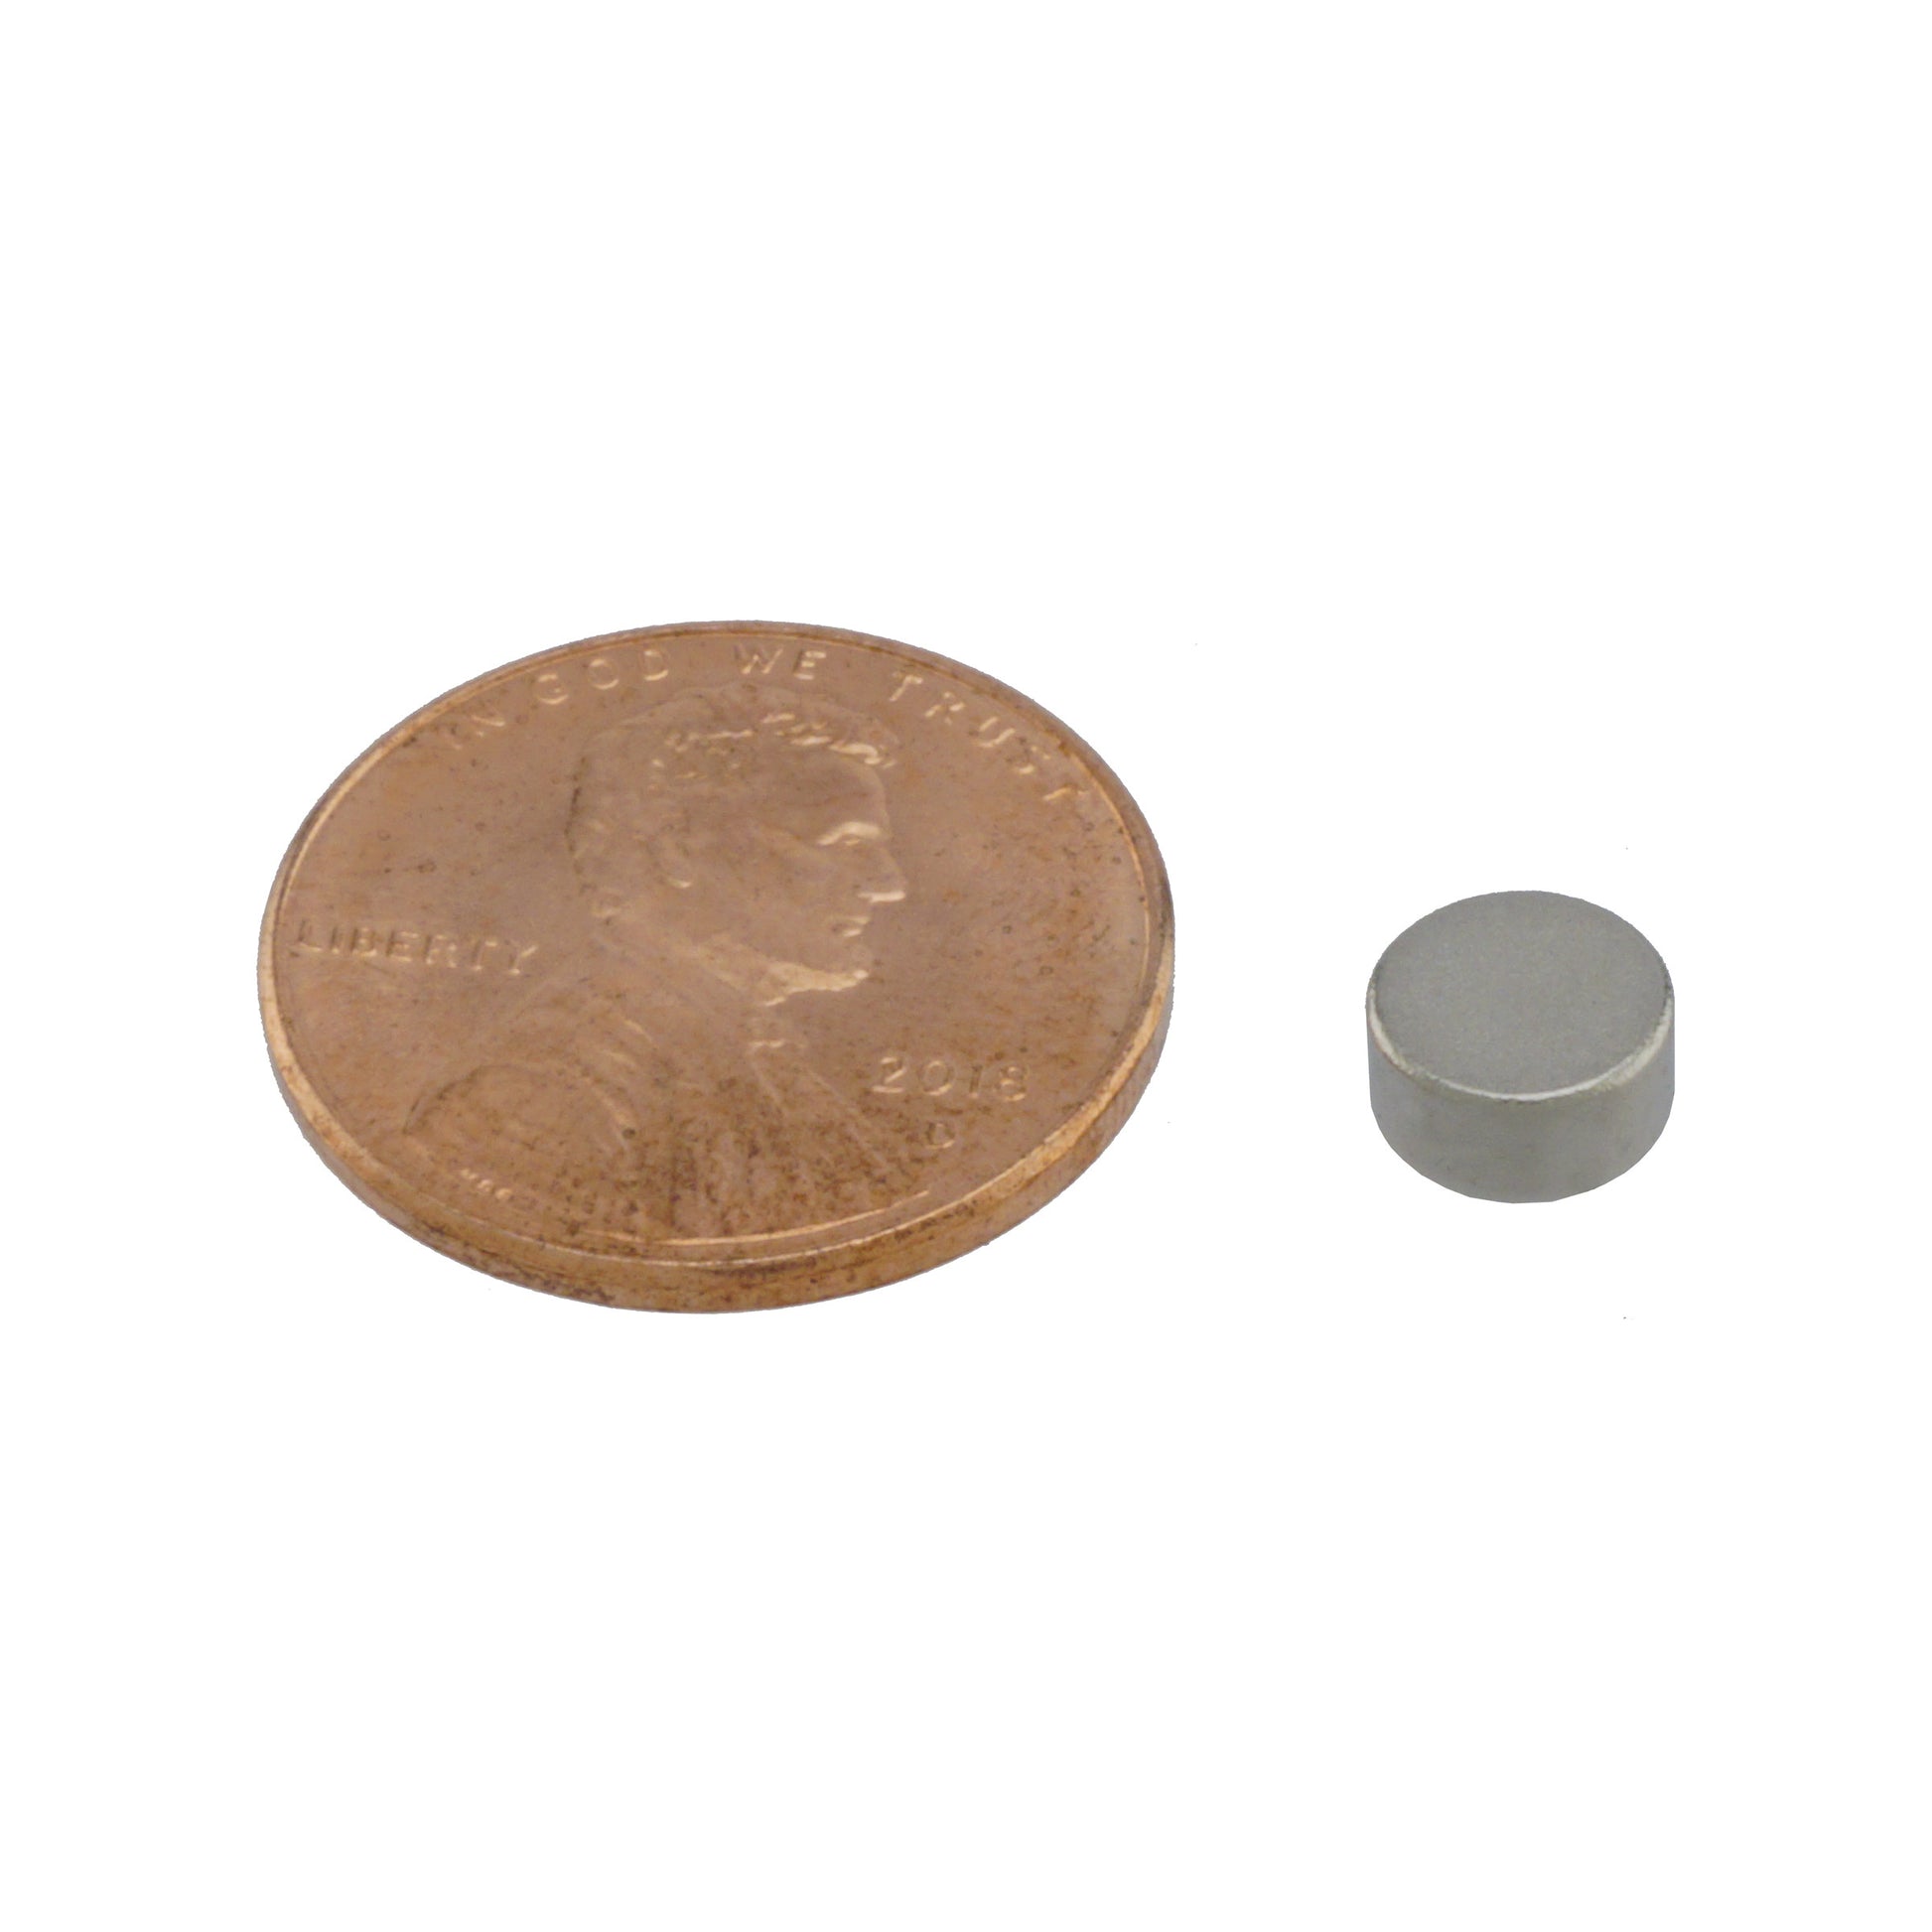 Load image into Gallery viewer, SCD26 Samarium Cobalt Disc Magnet - Compared to Penny for Size Reference